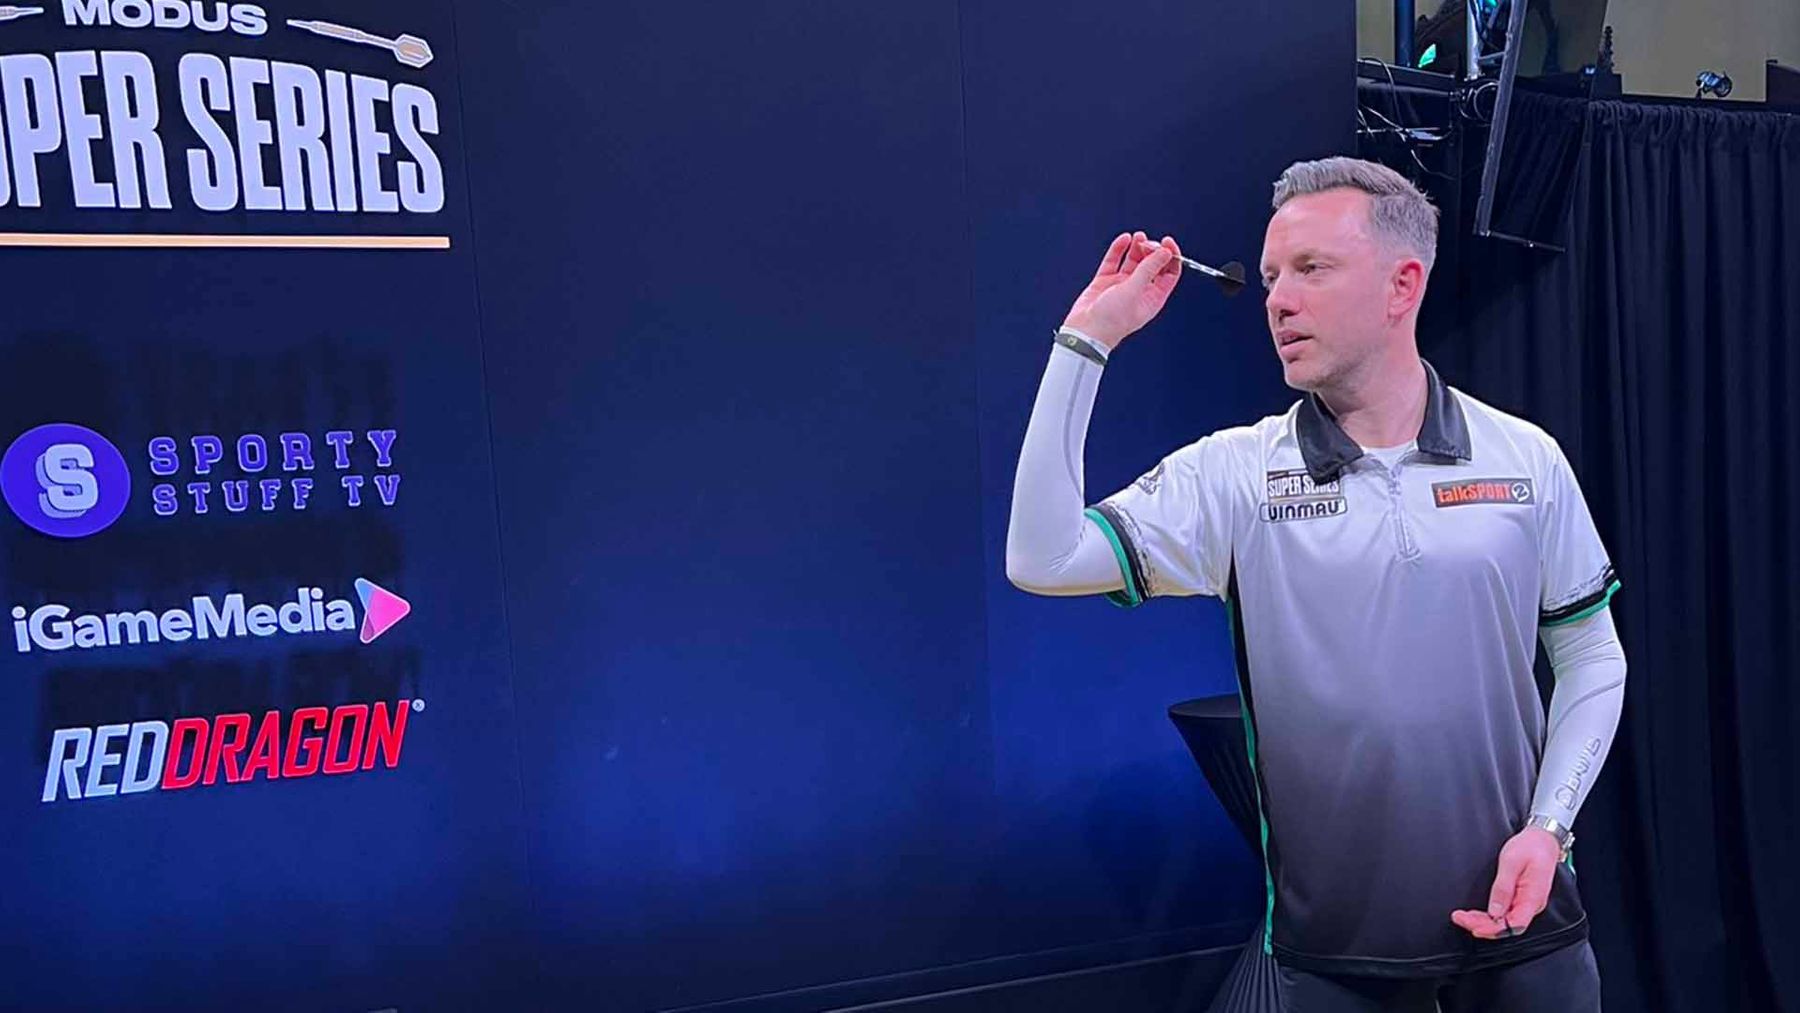 Modus Super Series Darts Paul Nicholson reflects on his return and picks out players he feels are good enough to win PDC Tour cards for 2023